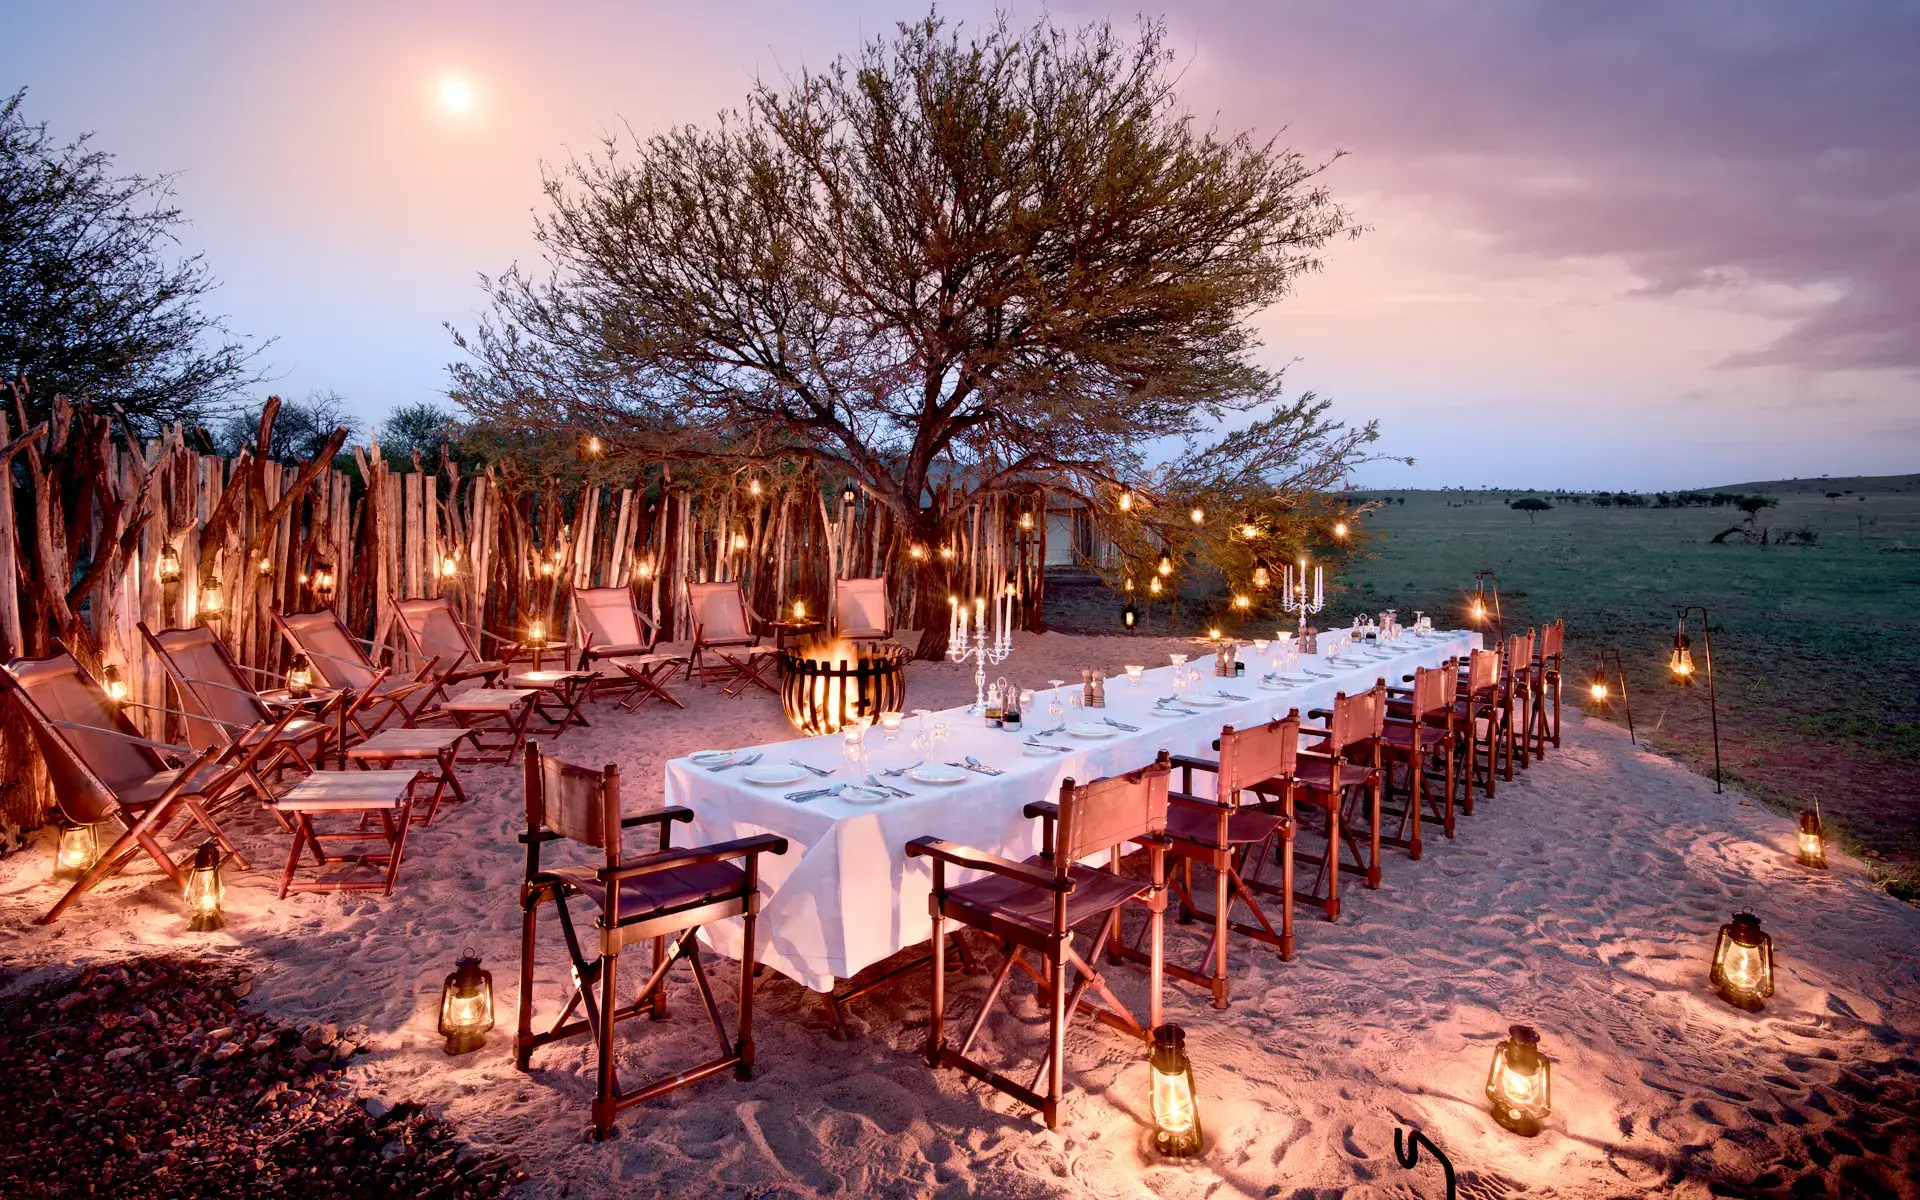 Outdoor dining under the African stars